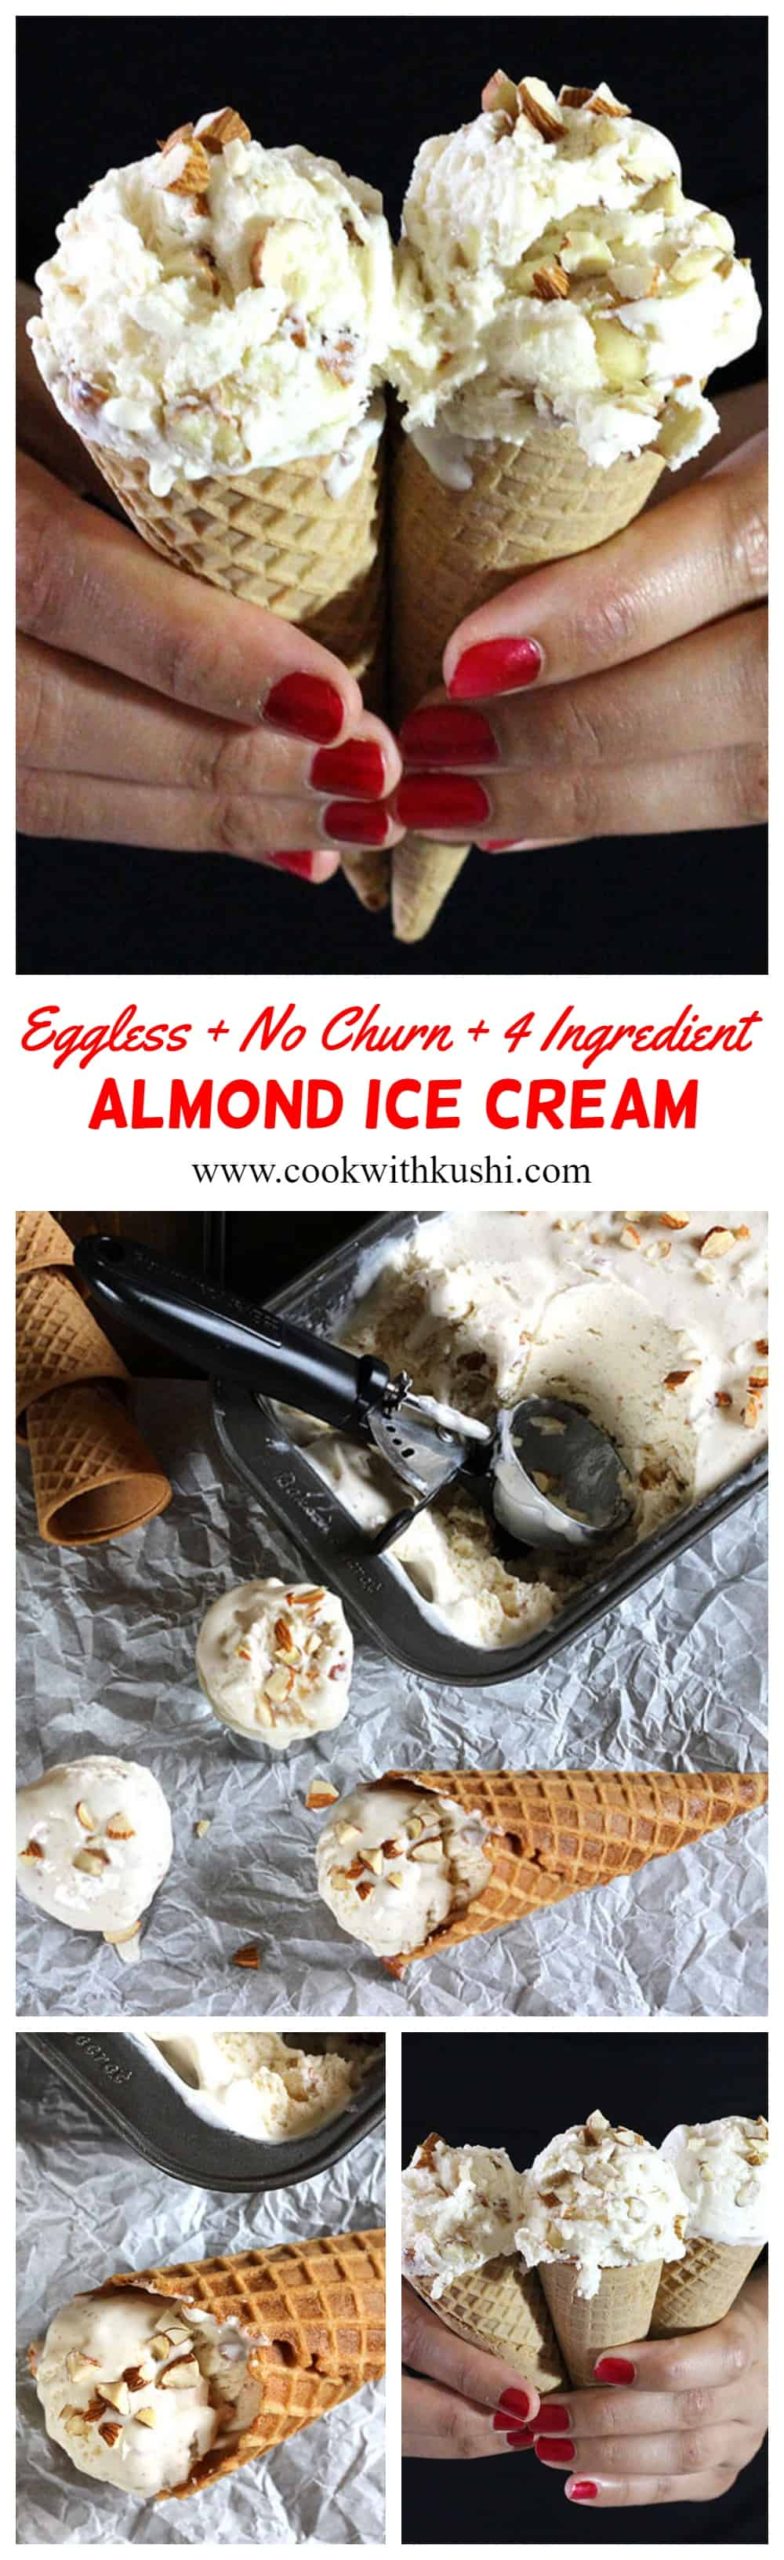 Roasted Almond Ice Cream or Toasted Almond Ice Cream is an easy to make, smooth and creamy eggless no churn ice cream with authentic roasted almond flavor and requires only 4 ingredients to prepare. #almondicecream #toastedalmonds #roastedalmonds #Homemade #eggless #vegan #softicecream #summerrecipe #summerdessert #naturals